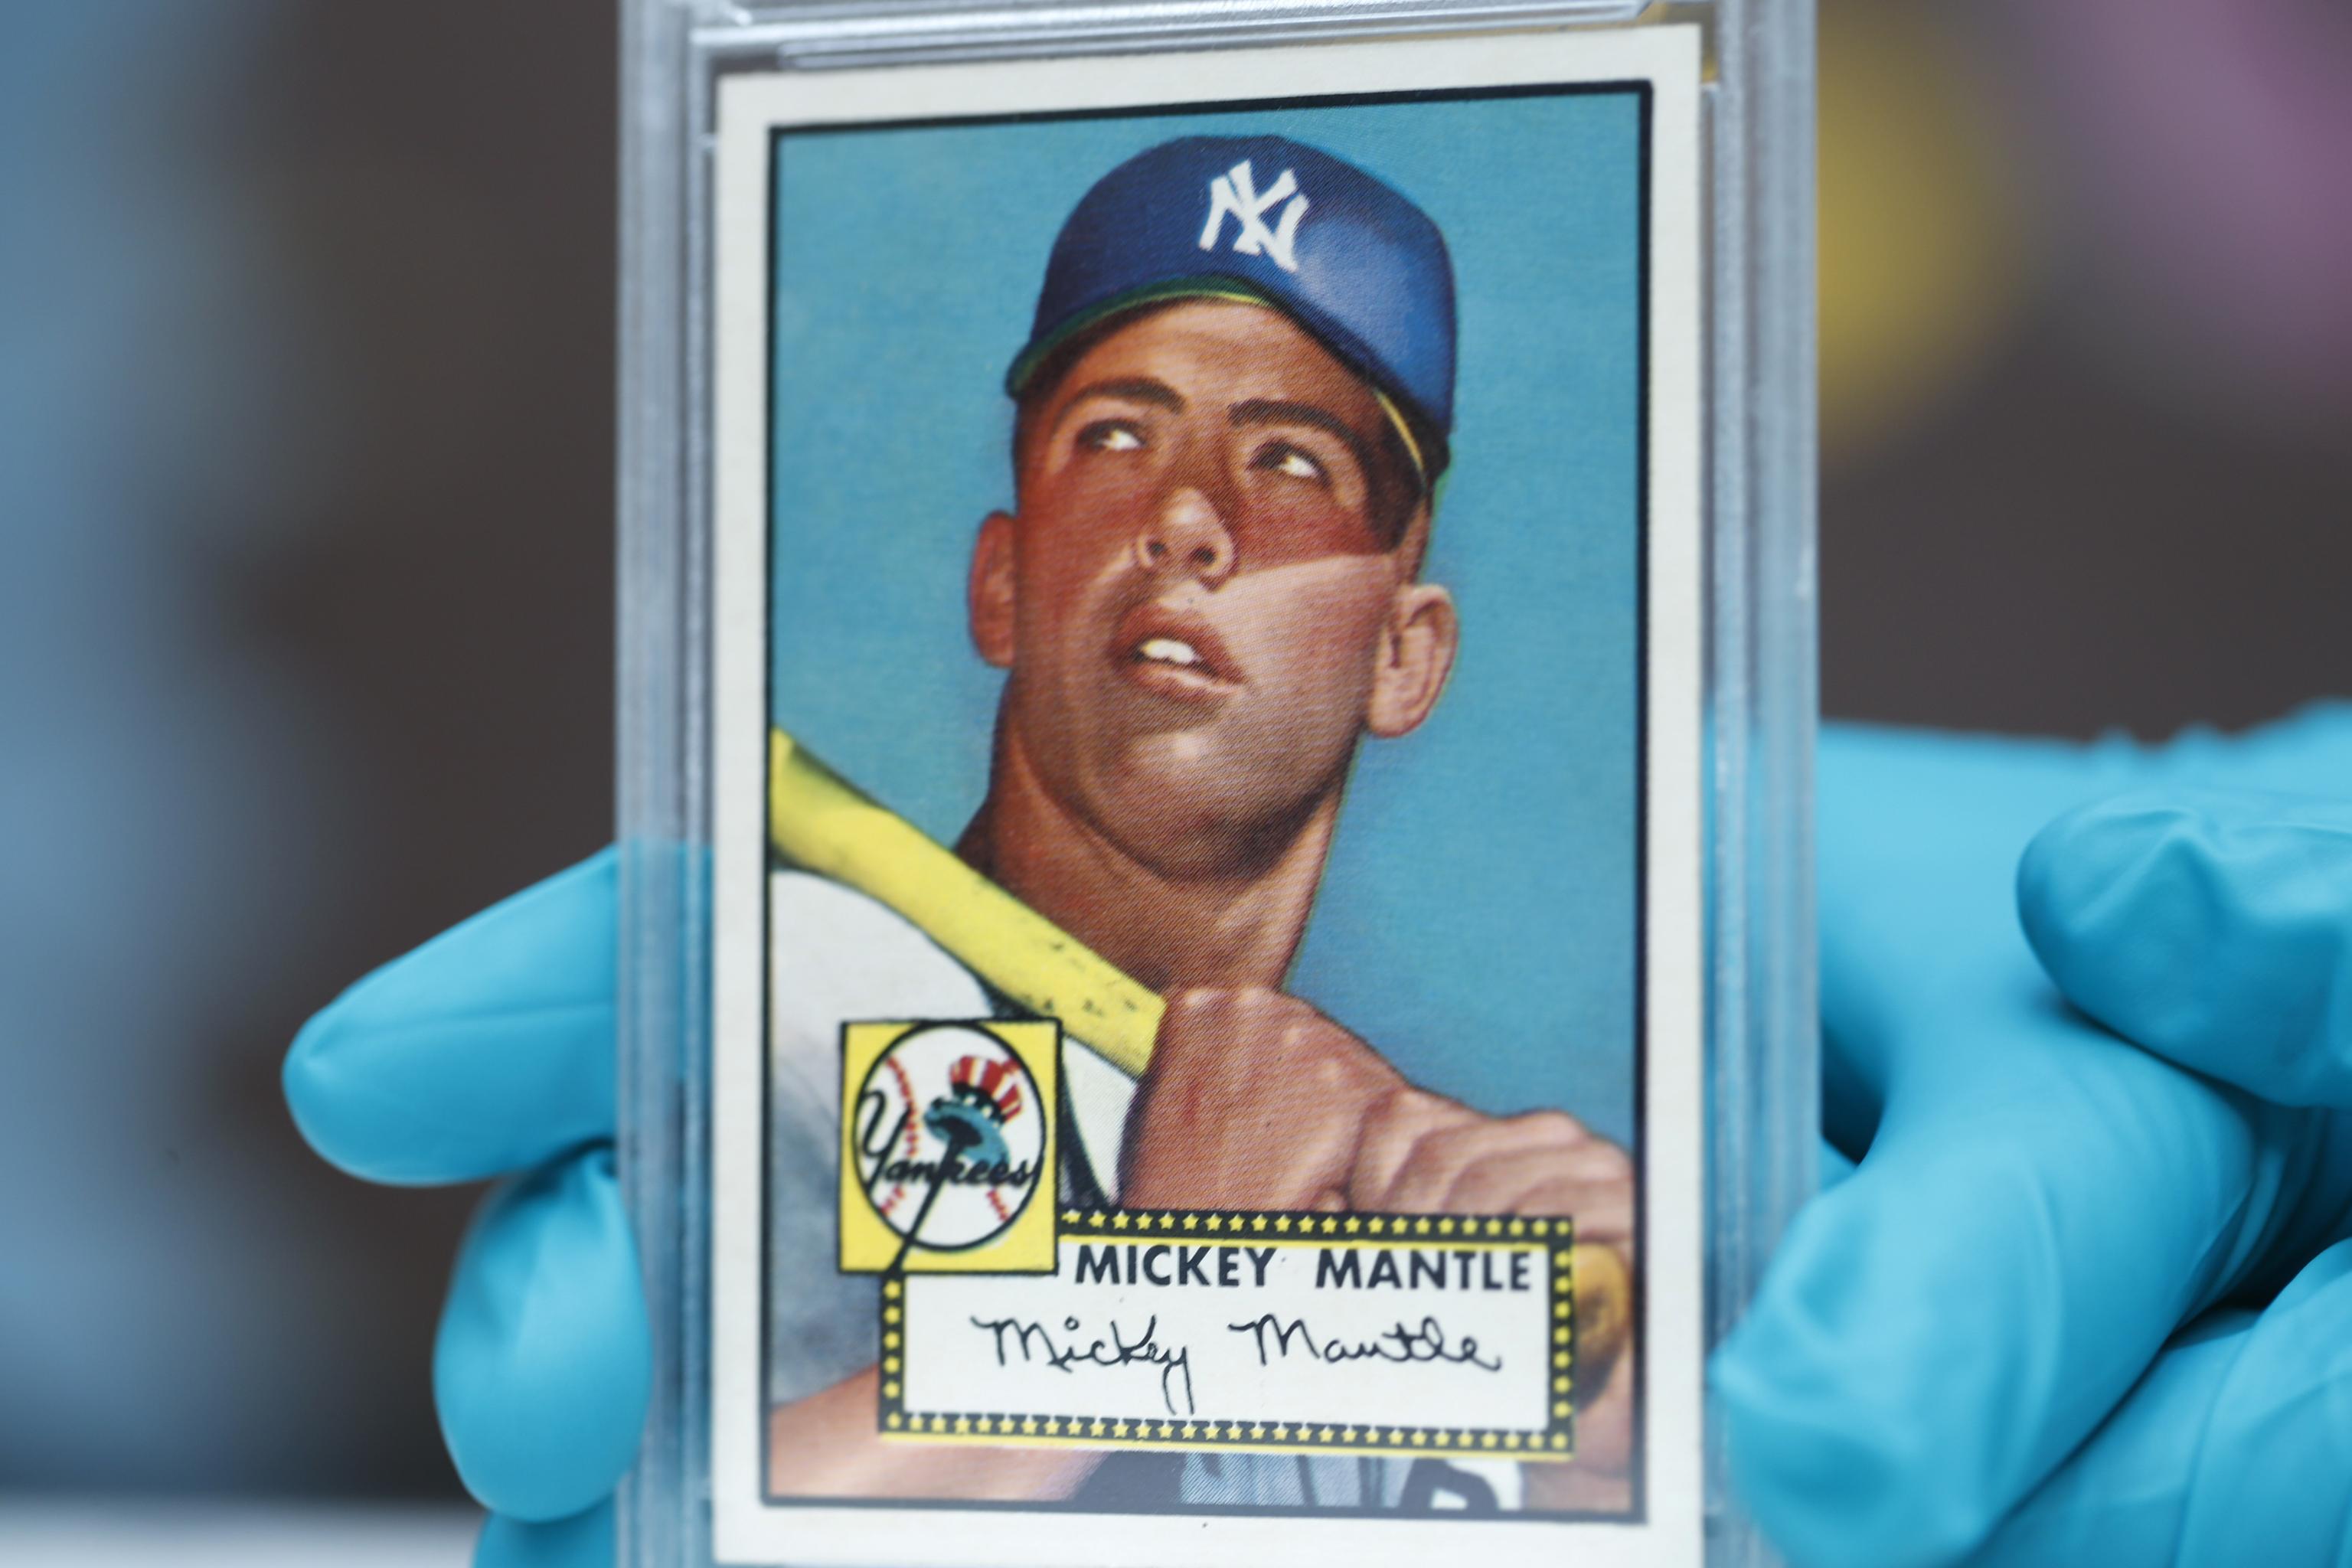 Issued by Bowman Gum Company  Mickey Mantle, Center Fielder, New